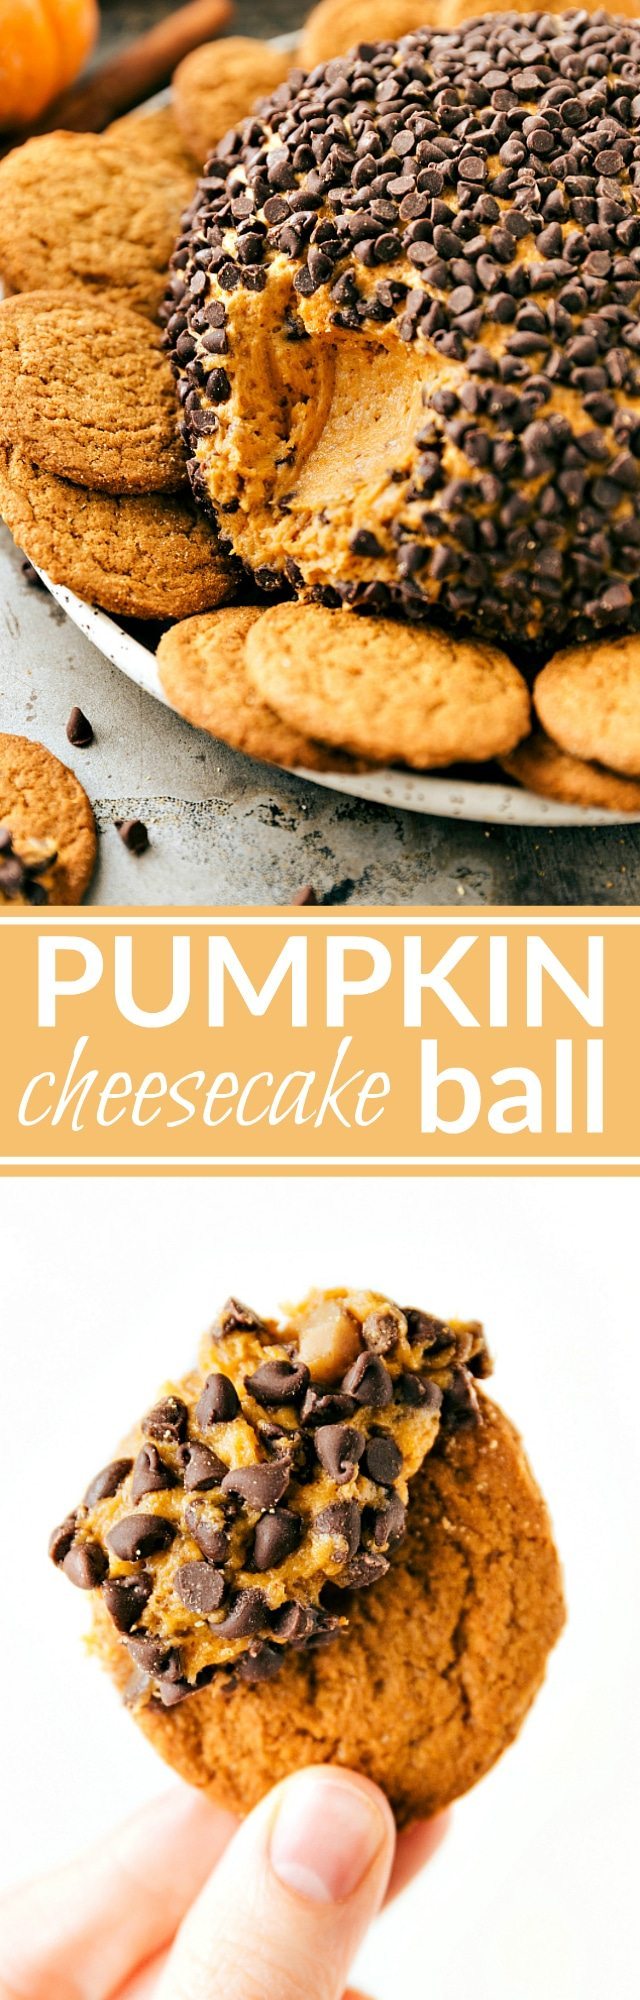 EASY PUMPKIN CHEESECAKE BALL! The perfect Fall/Thanksgiving dessert appetizer! A pumpkin chocolate-chip toffee cheesecake ball bursting with pumpkin spice flavor. Recipe from chelseasmessyapron.com